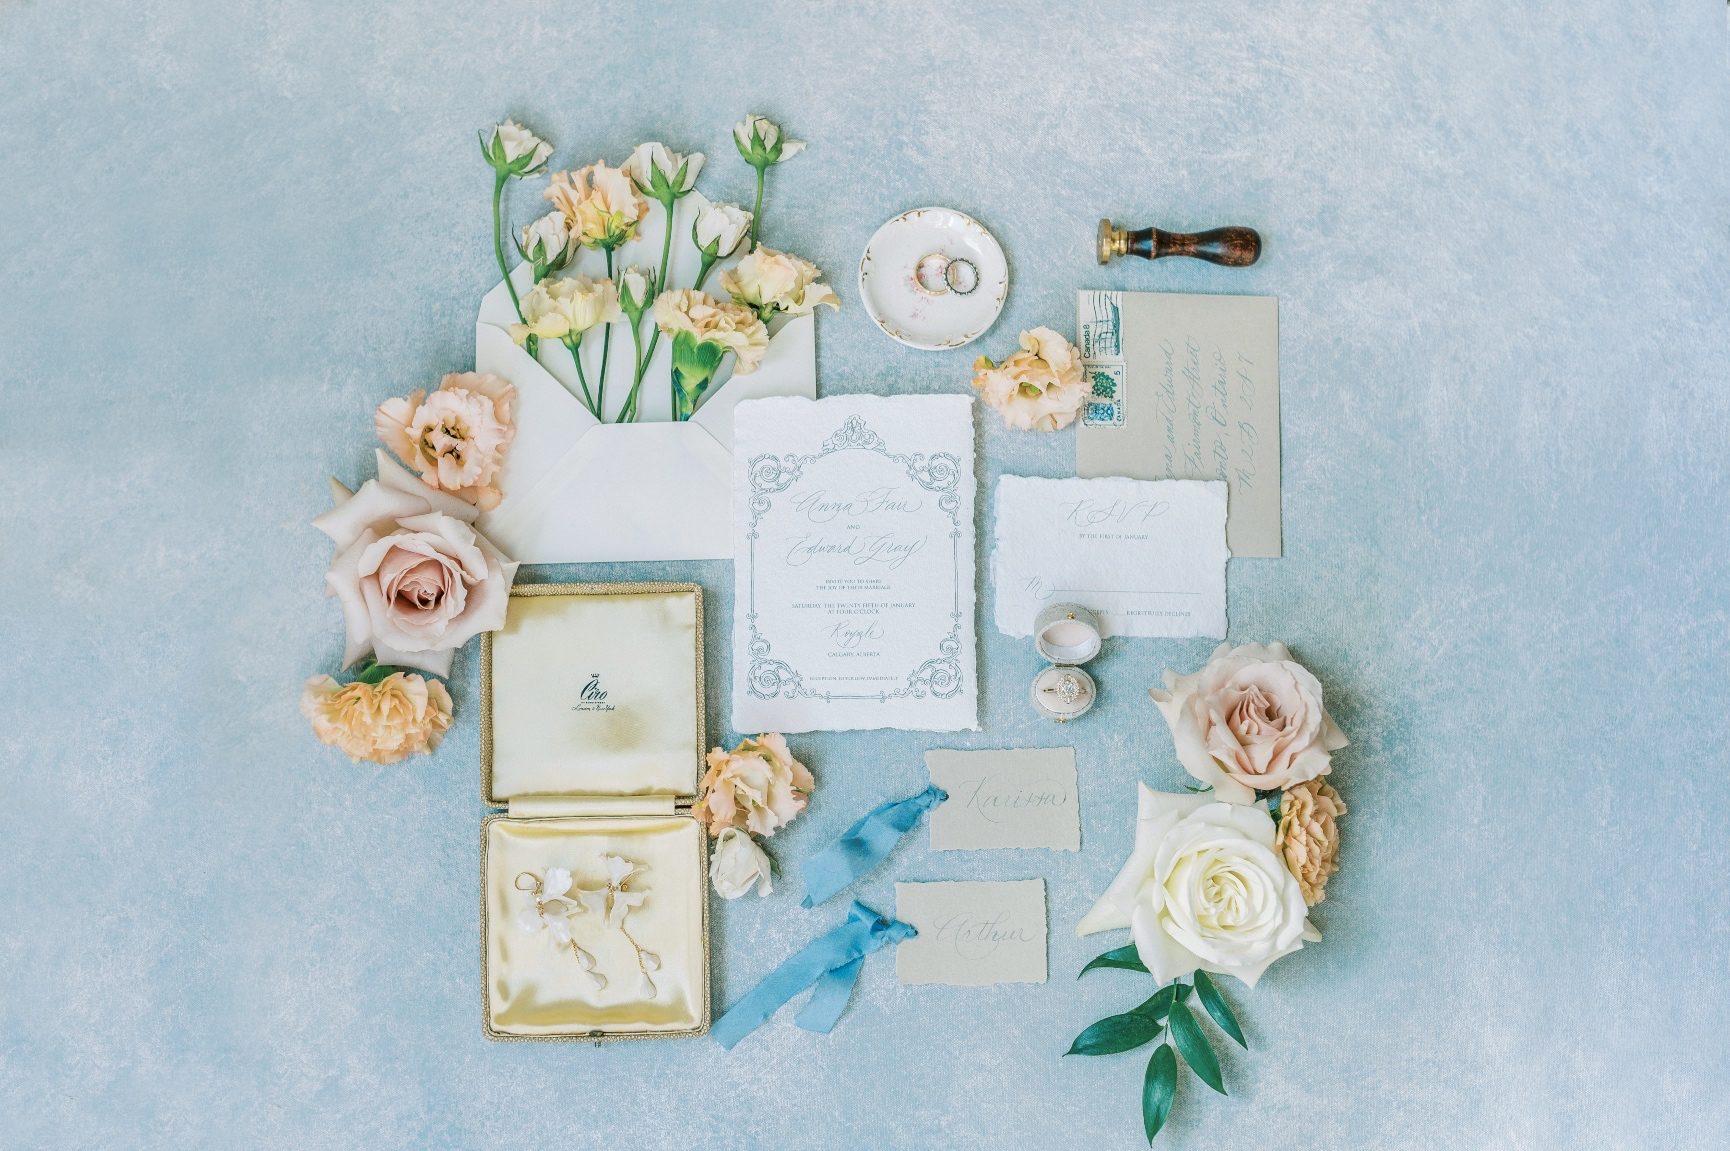 A flat lay shot of the beautiful stationary - wedding invitation, place rsvp cards, place card accented by pretty peach, blush and white blooms